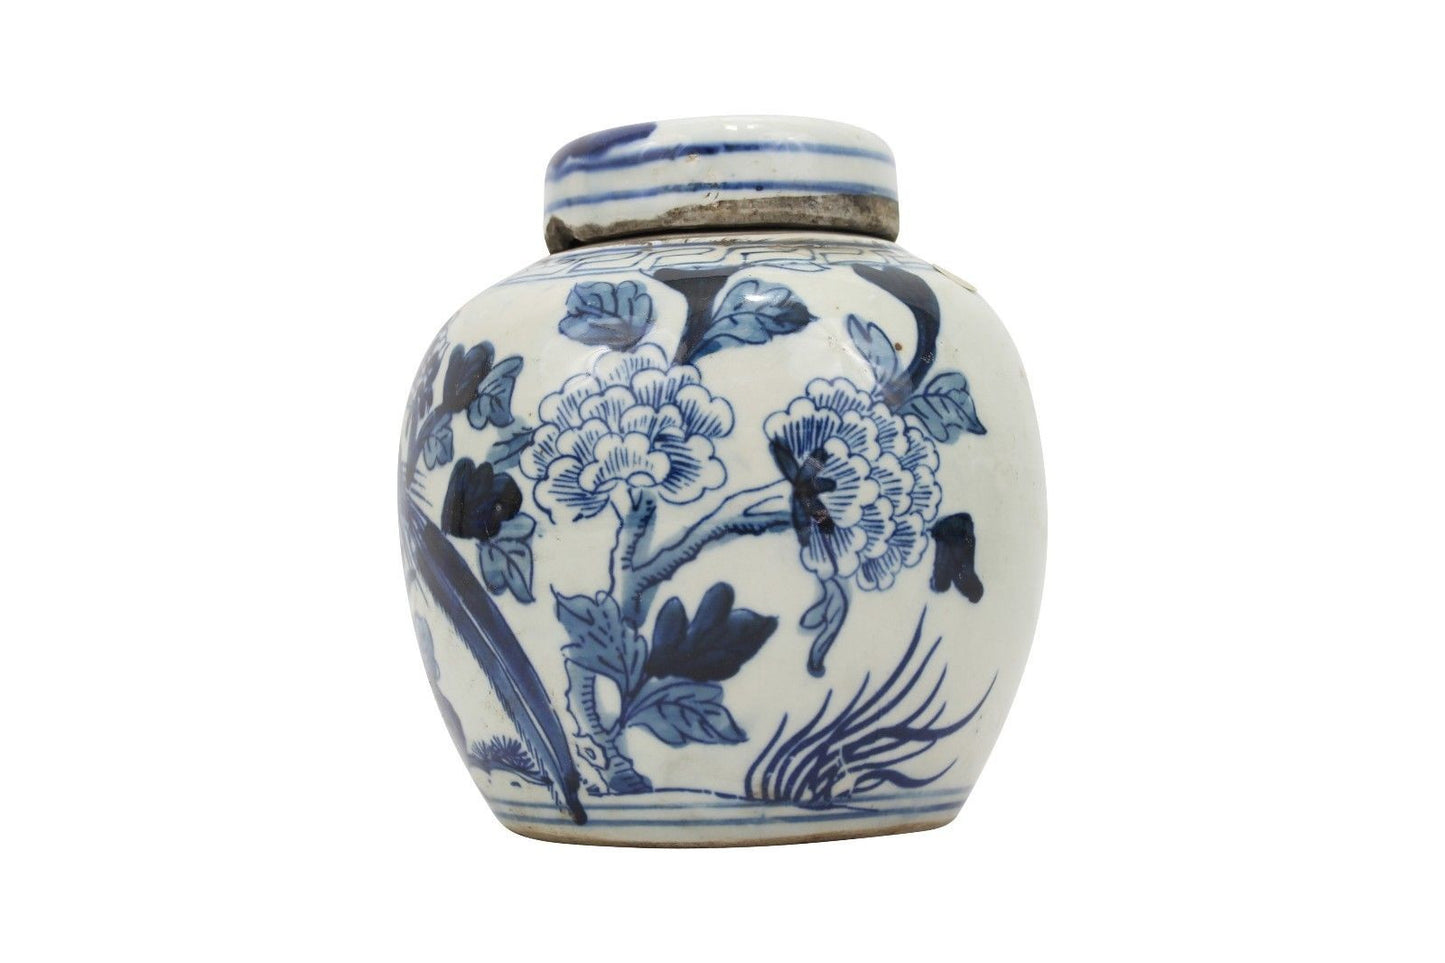 Beautiful Antiqued Style Blue and White Porcelain Bird Motif Cover Jar 6" no